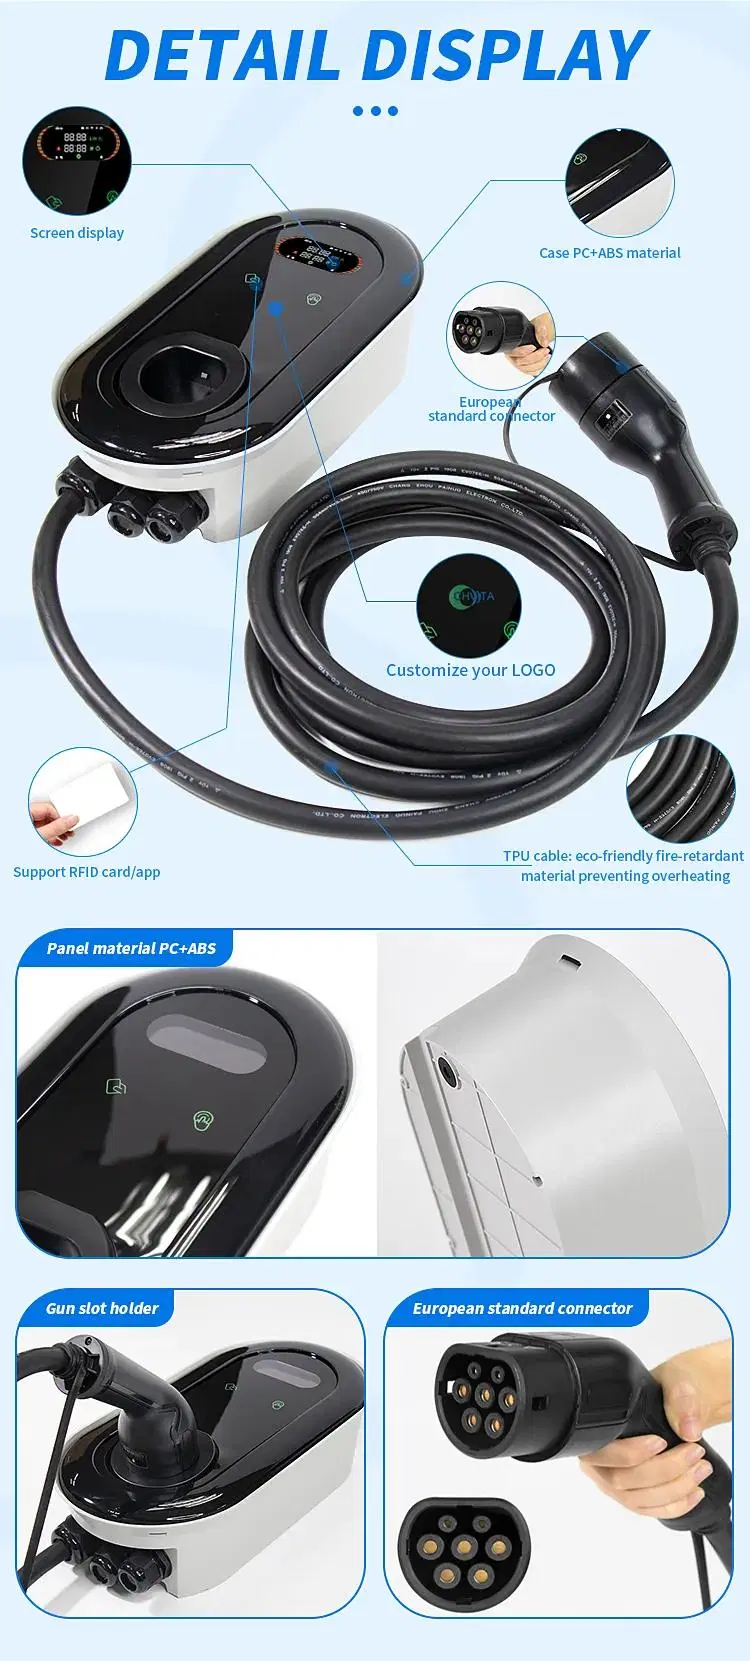 11kw Type 2 Wall-Mounted Home EV Charging Station Electric Car Charger Wall Connector RFID Bluetooth WiFi 4G APP